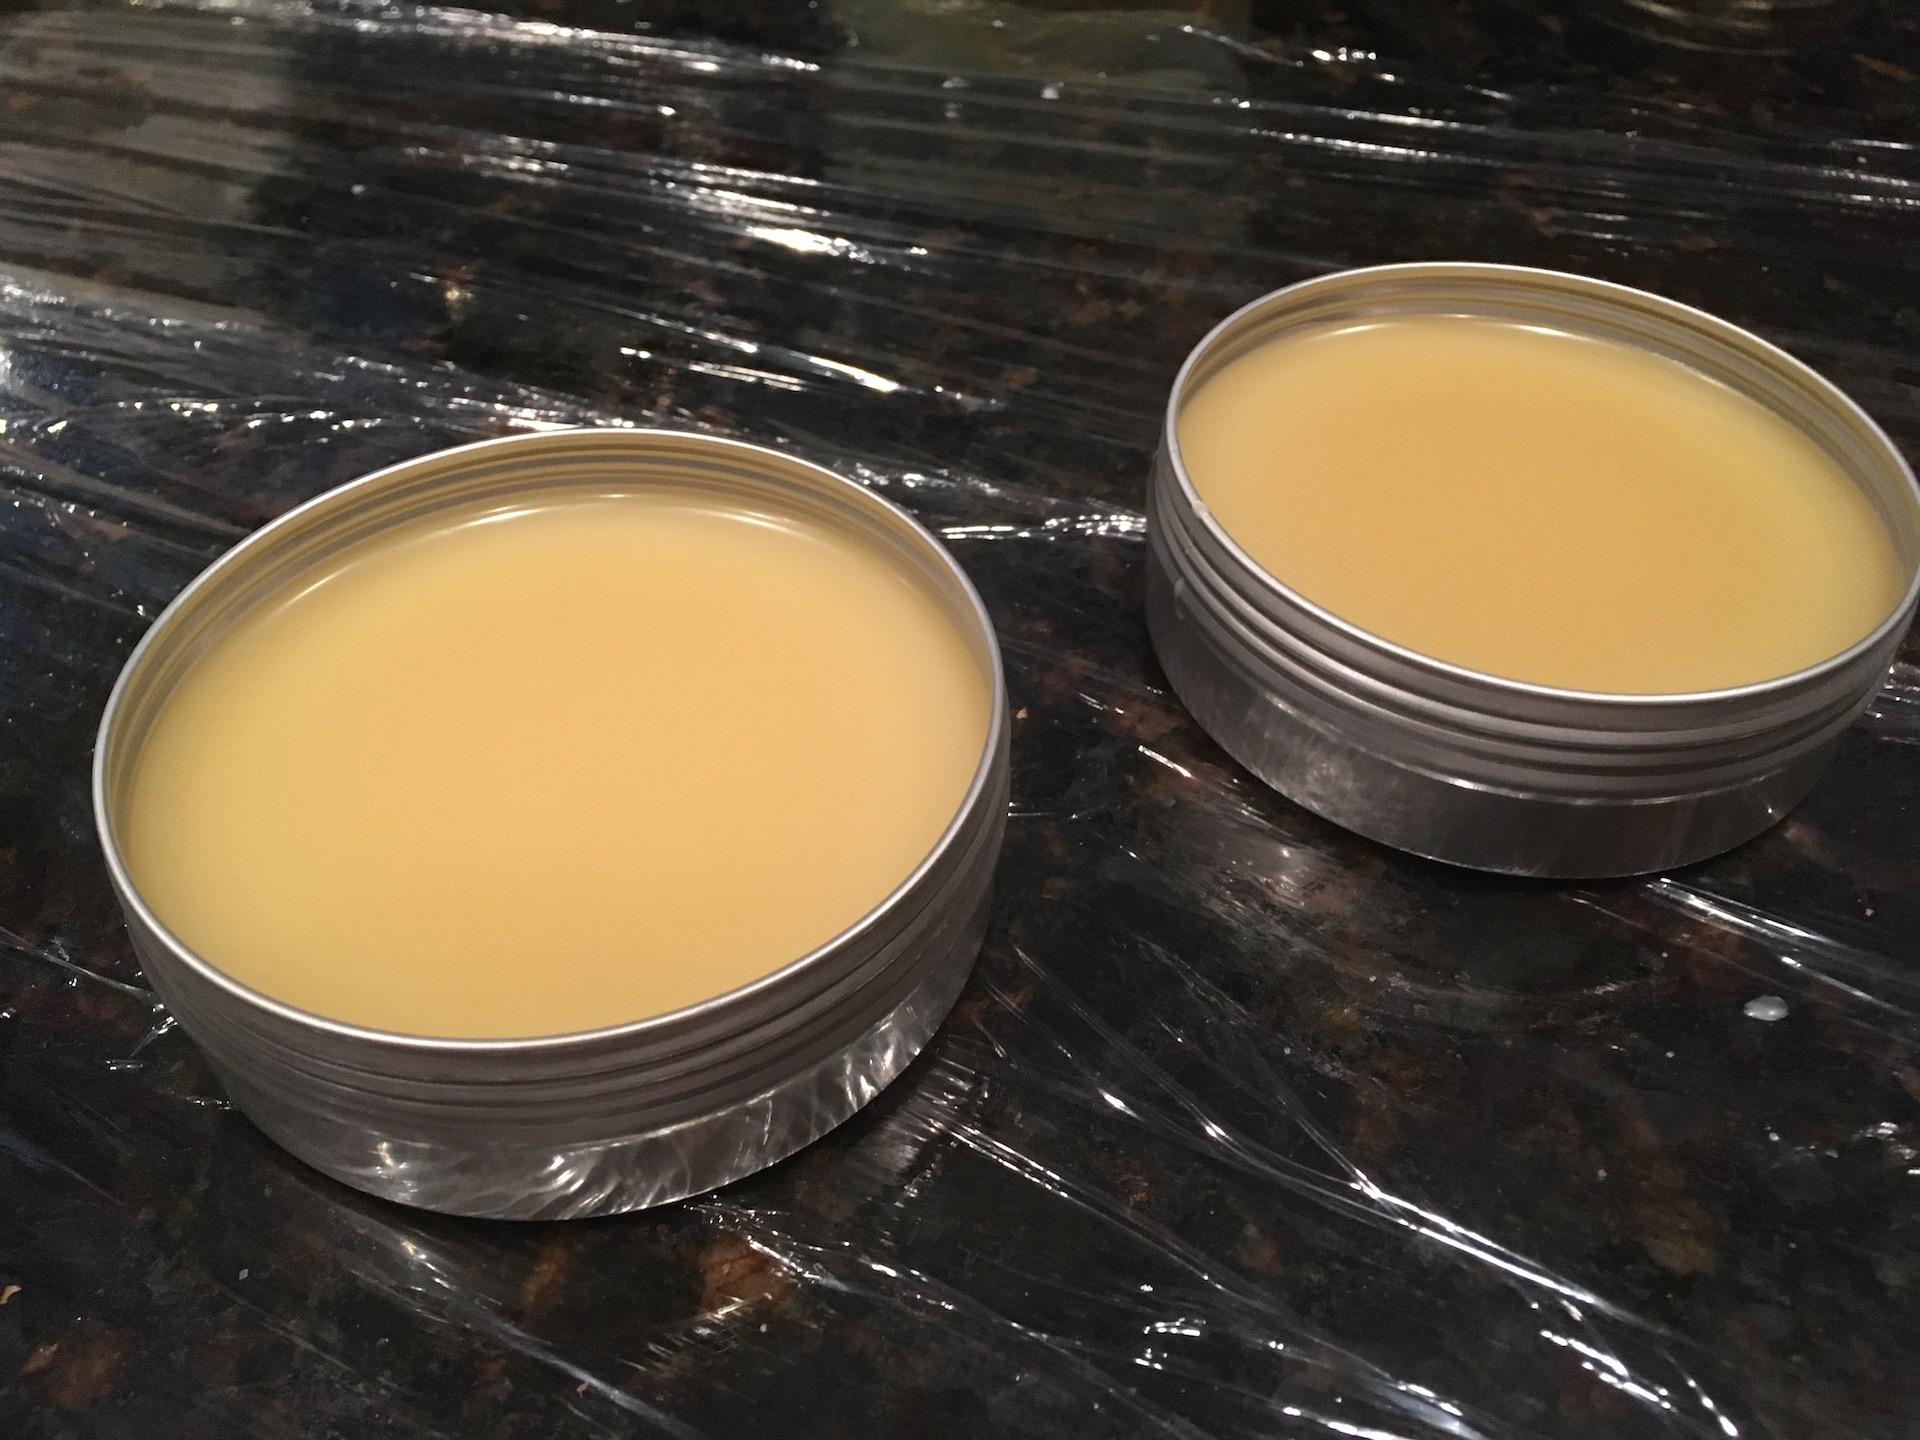 Homemade Beeswax Leather Shoe Polish Conditioner Recipe